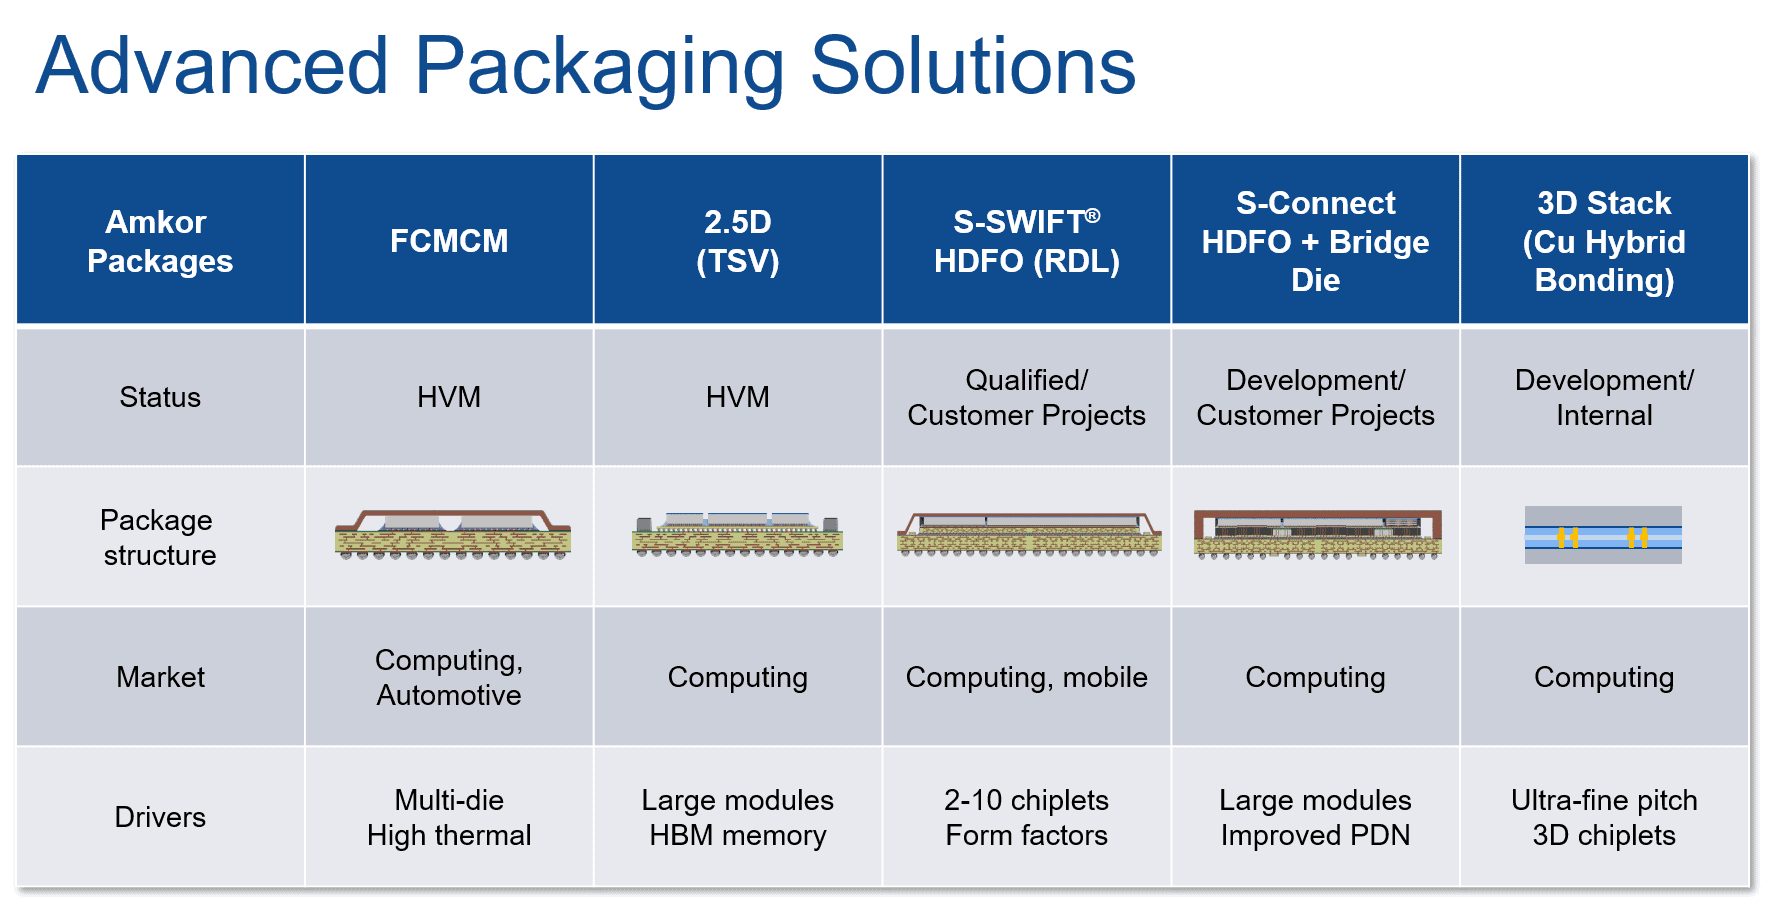 Advanced Packaging Solutions - Amkor